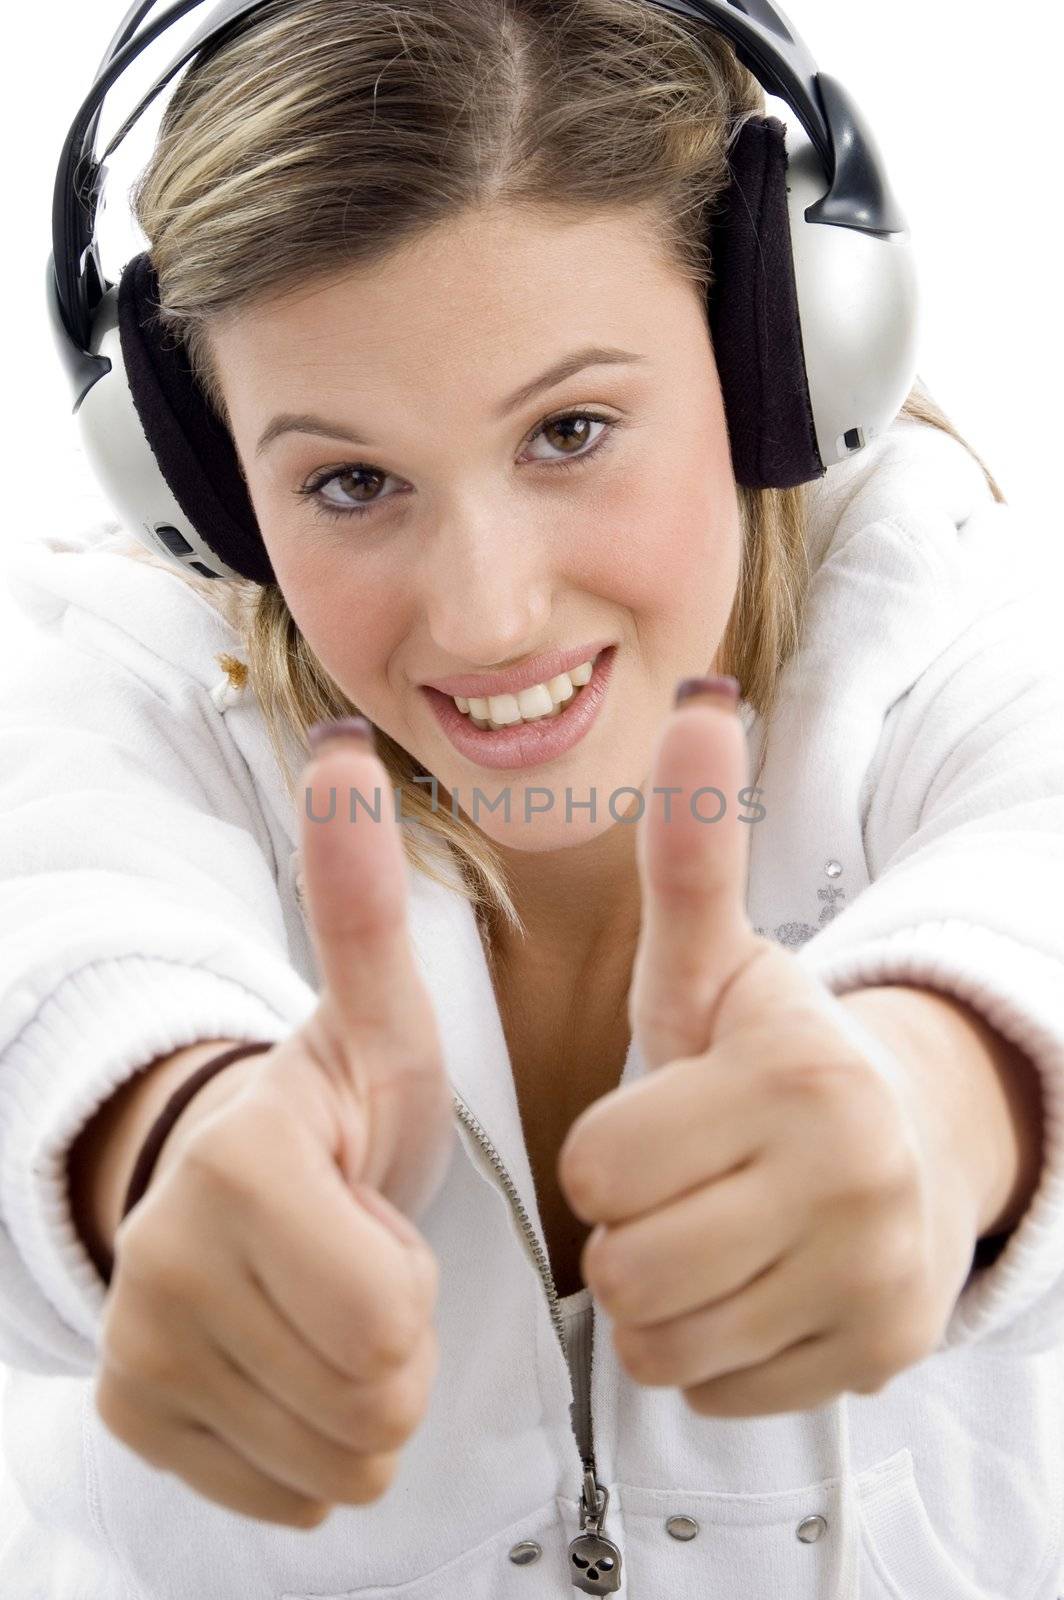 young model listening music with headphones and showing thumbs up against white background